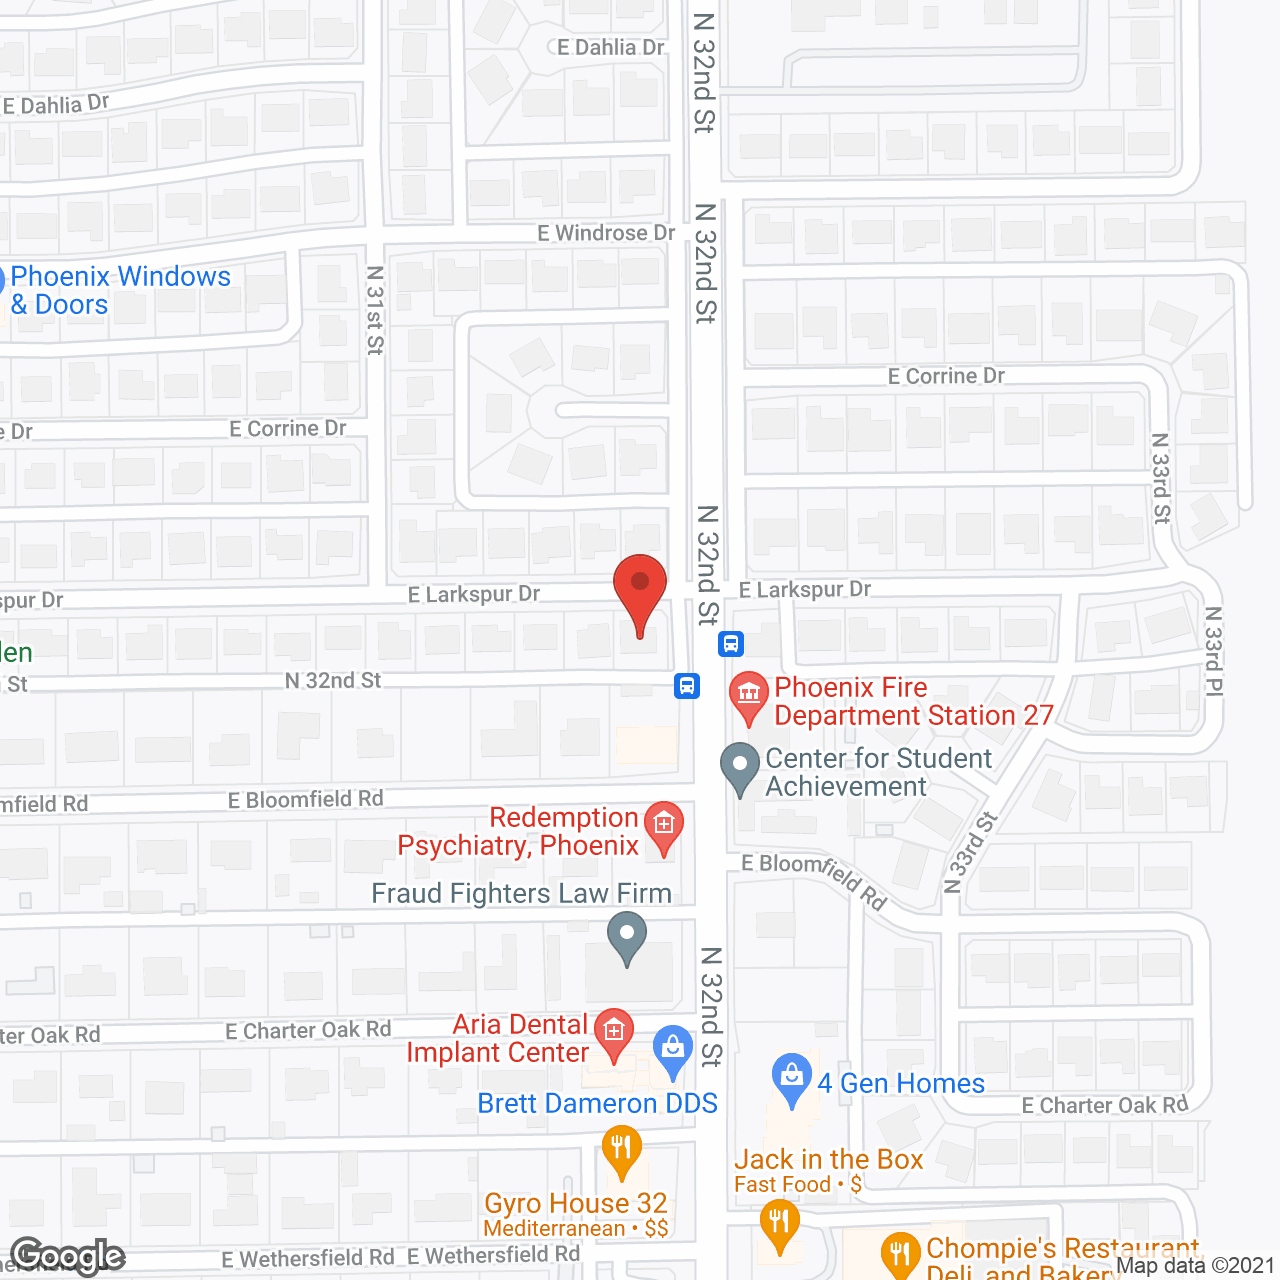 Footsteps Assisted Living Care Home in google map